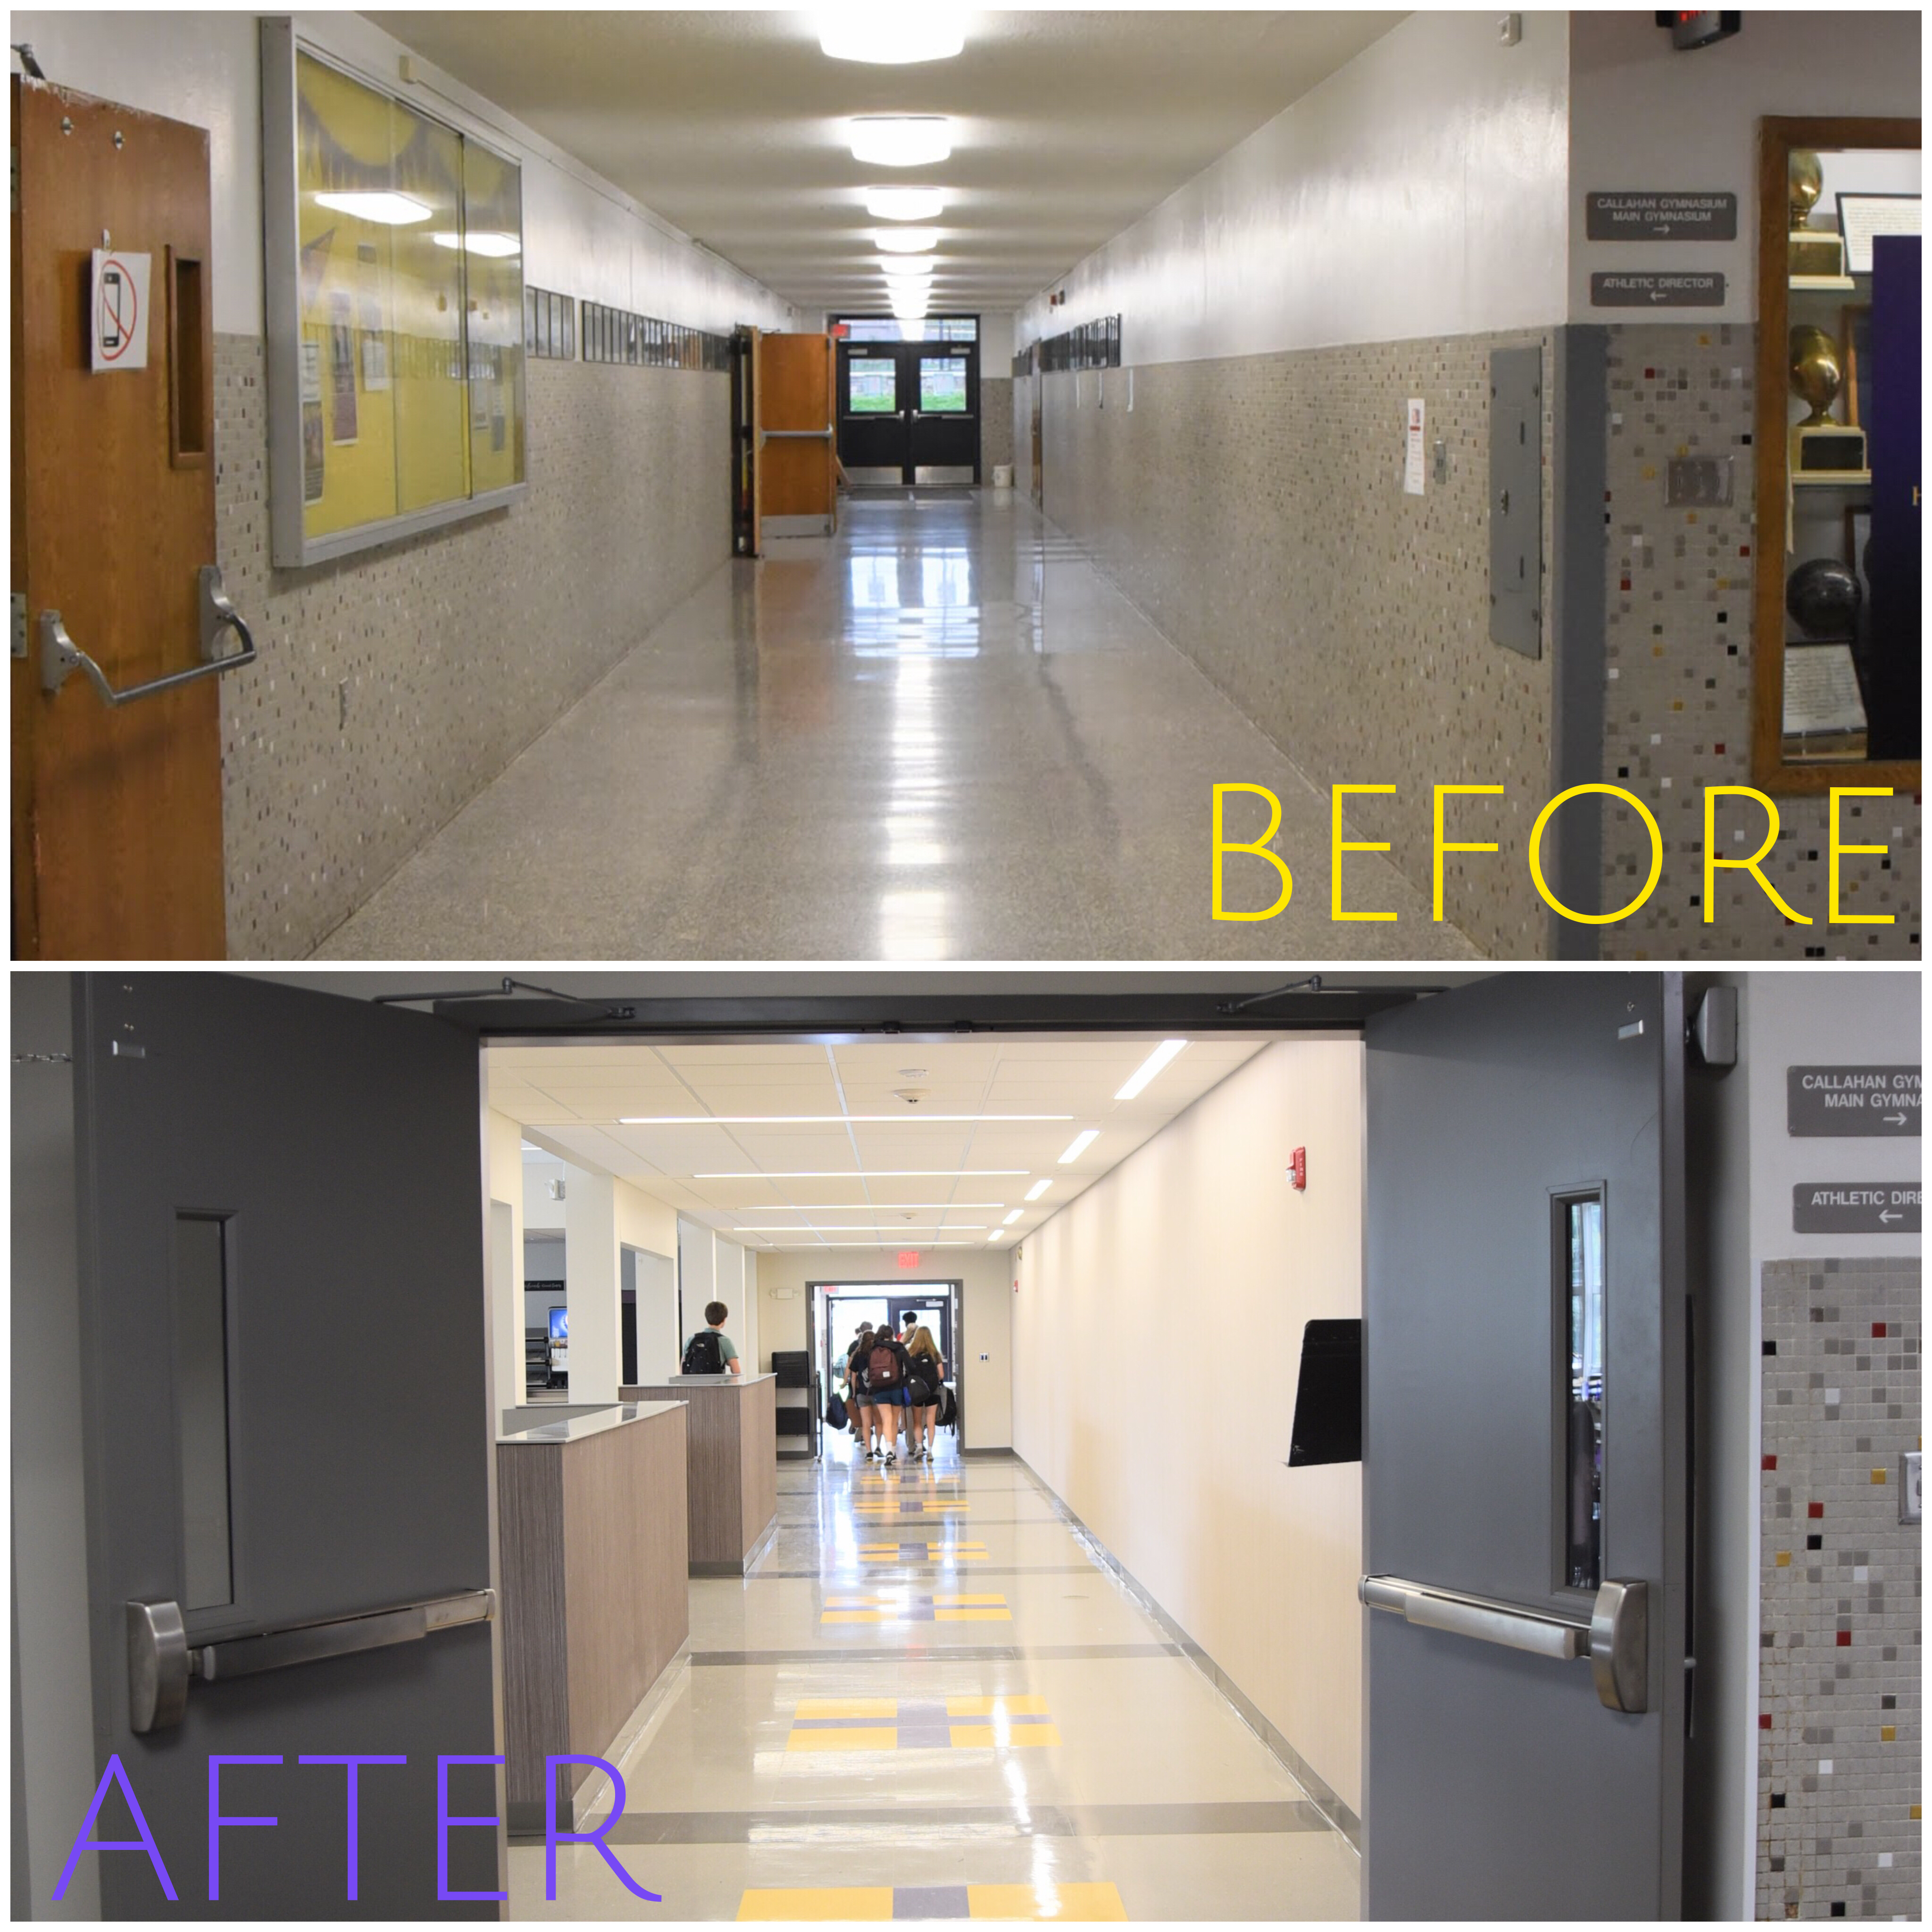 Dining Center hallway before and after